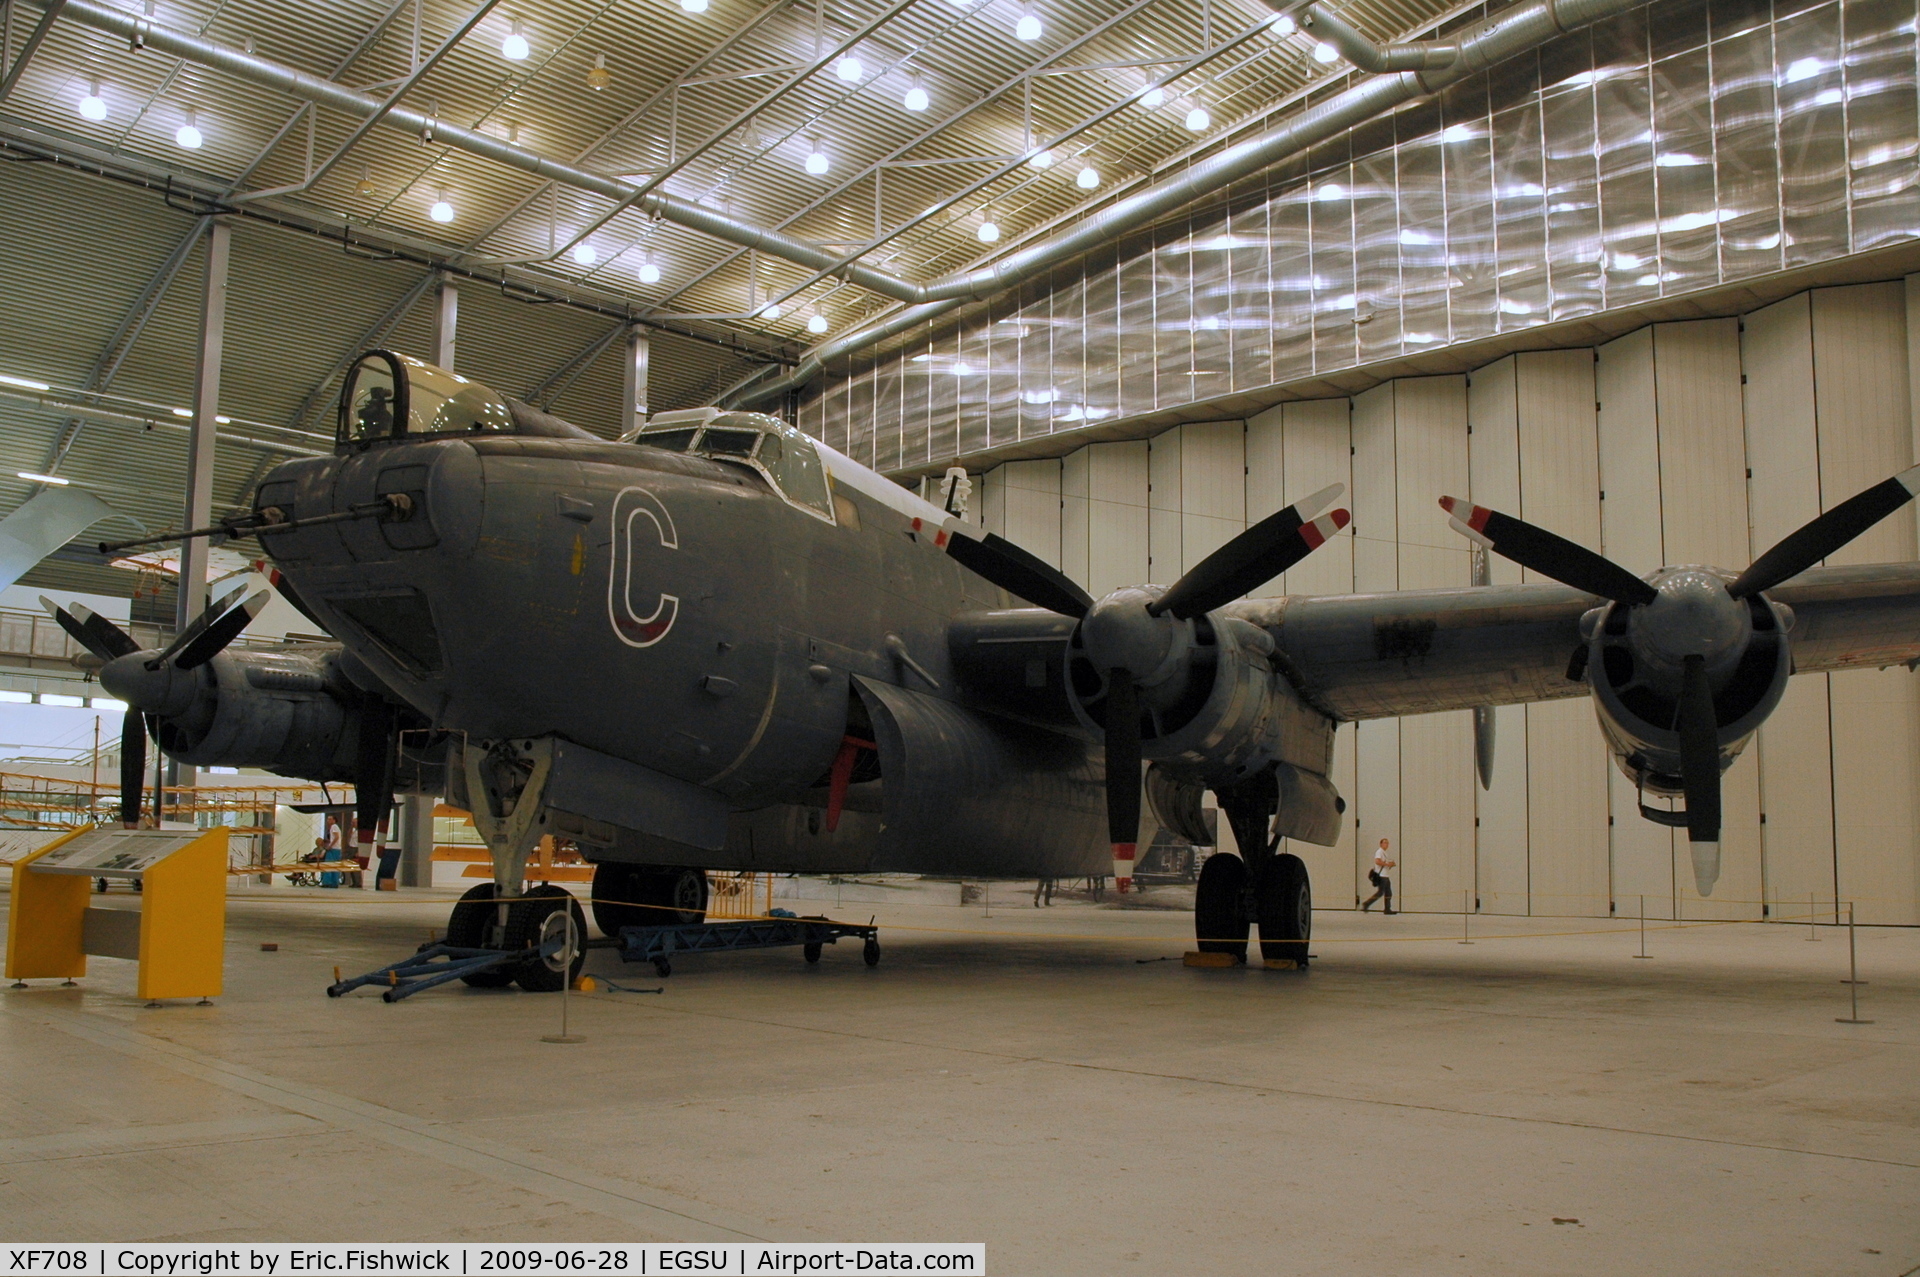 XF708, Avro 716 Shackleton MR.3/3 C/N Not found XF708, 3. Avro 696 Shackleton MR3/3 at The Imperial War Museum, Duxford